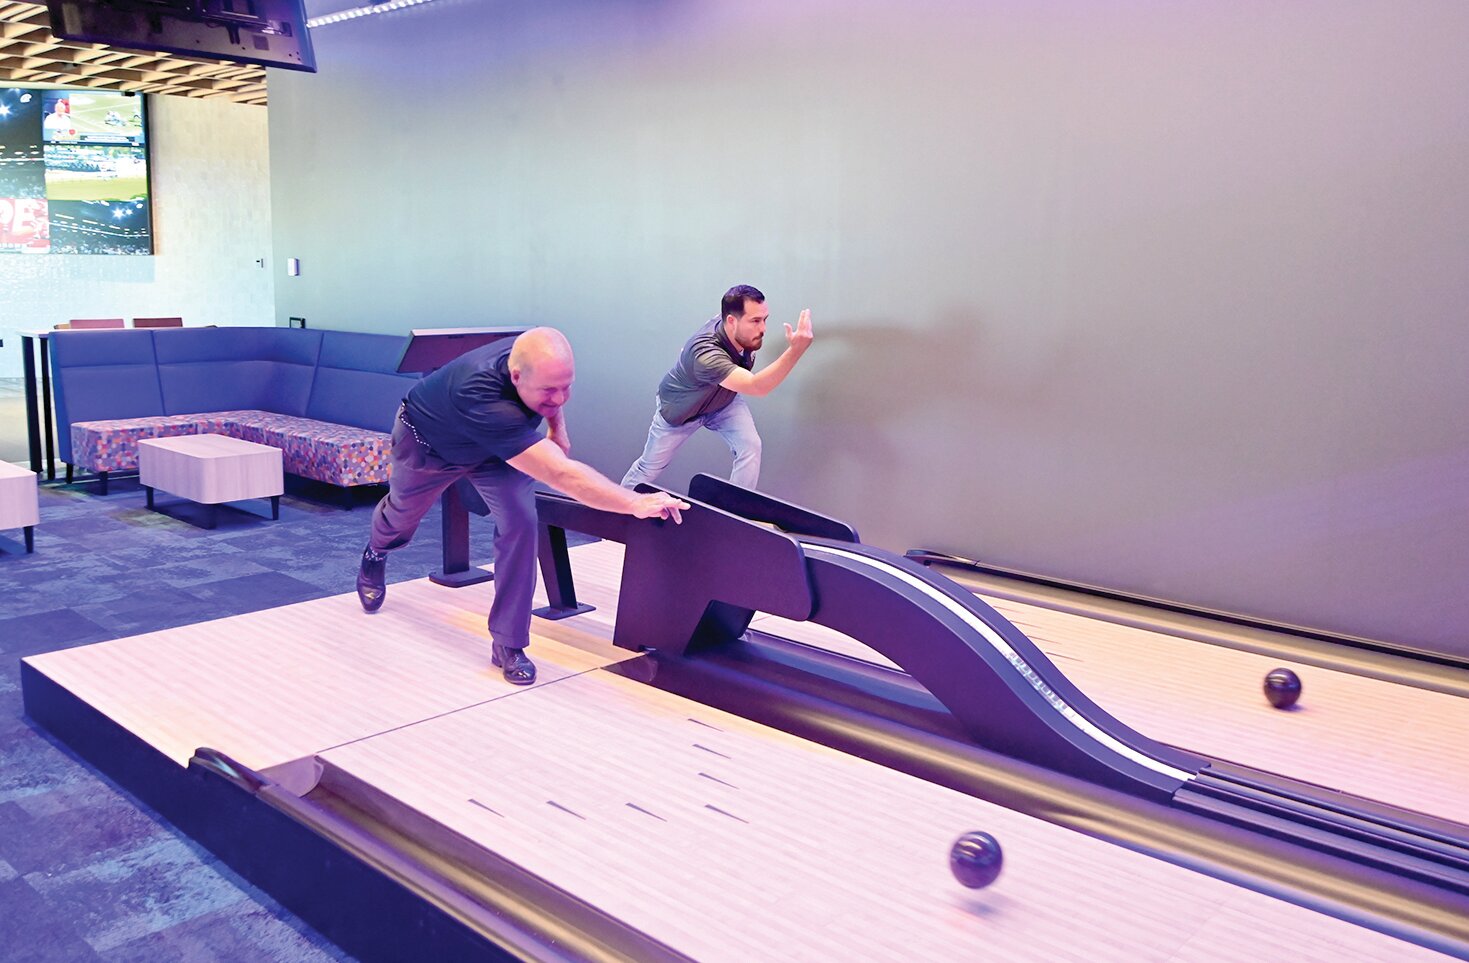 State Tech President Dr. Shawn Strong and Marketing Director Brandon McElwain have a little fun trying out duckpin bowling at the new event center, now named Osage View.